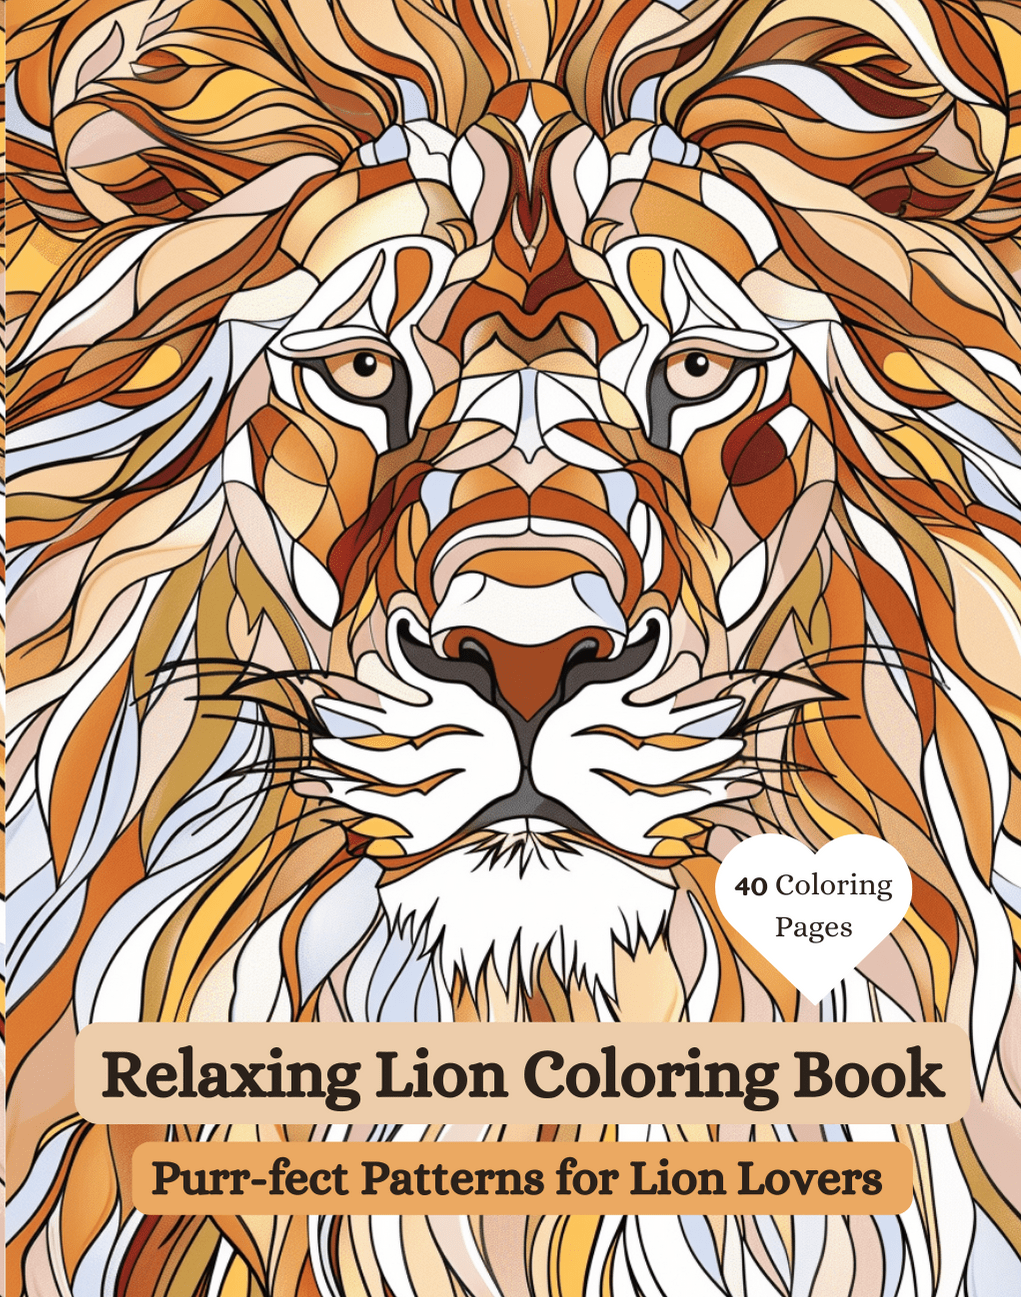 Relaxing Lion Coloring Book